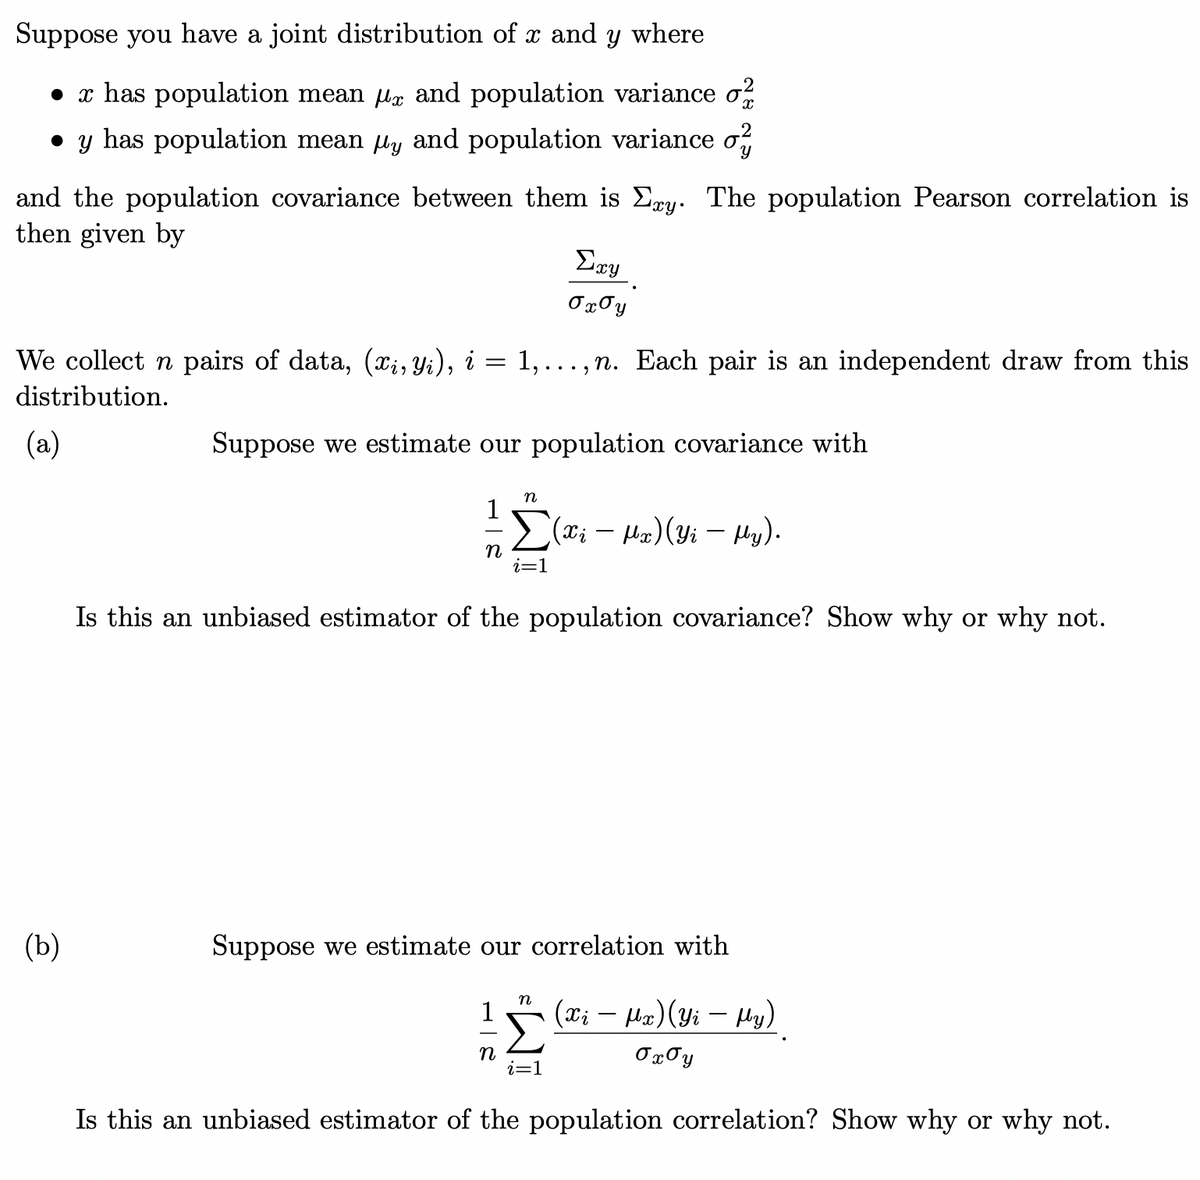 Suppose you have a joint distribution of x and y where
• x has population mean ug and population variance o?
• y has population mean ly and population variance o,
and the population covariance between them is Ery. The population Pearson correlation is
then given by
Ery
OxJy
We collect n pairs of data, (X;, Yi), i = 1,.. , n. Each pair is an independent draw from this
distribution.
(a)
Suppose we estimate our population covariance with
n
1
(x; – Ha)(yi – µy).
i=1
Is this an unbiased estimator of the population covariance? Show why or why not.
(b)
Suppose we estimate our correlation with
(xi – Ha)(Yi – Hy)
-
n
i=1
Ox0y
Is this an unbiased estimator of the population correlation? Show why or why not.
=WI
